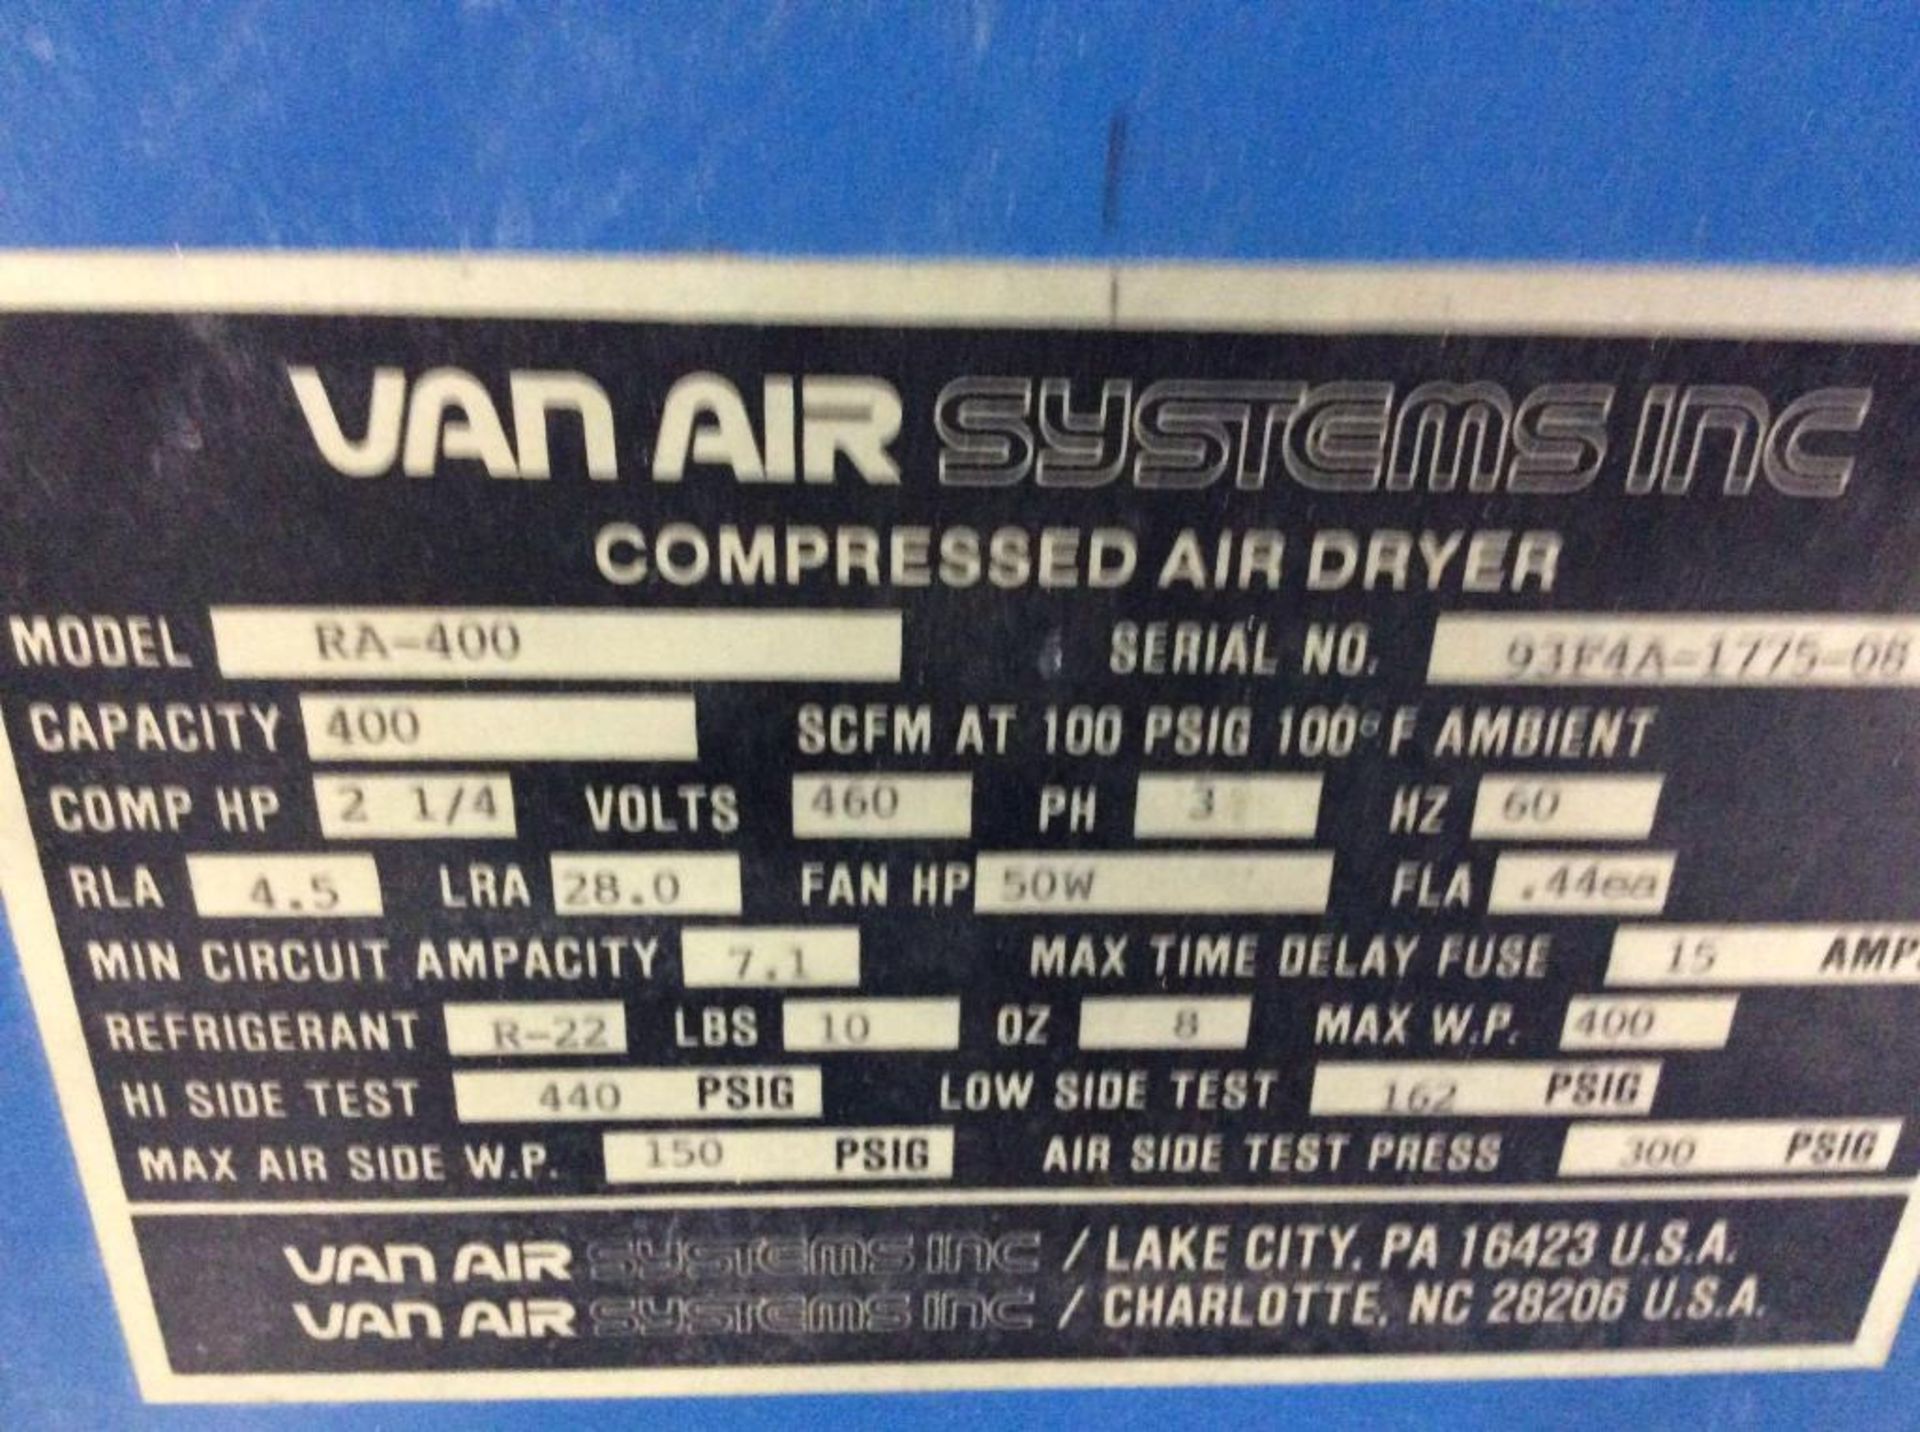 Van Air RA 400 refrigerated air dryer, sn 93F4A-1775-08, with refrigerant & gasket - Image 3 of 3